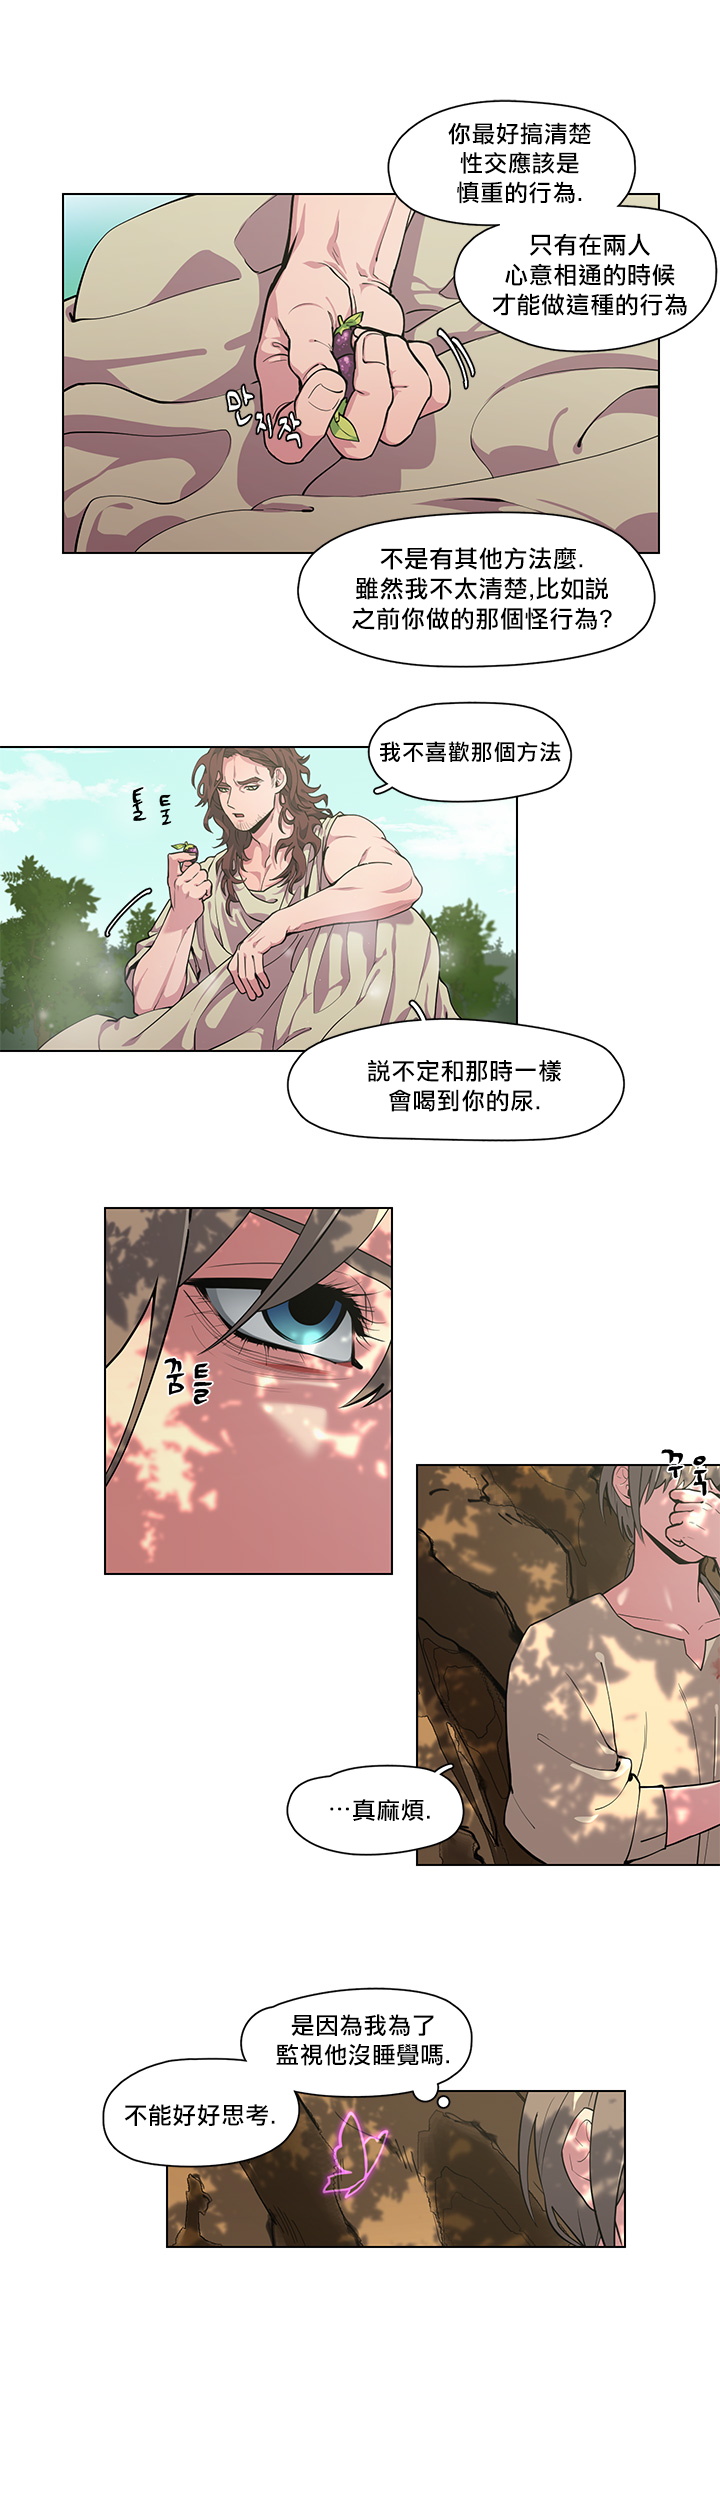 [Potion] The Warrior and the Deity | 勇者与山神 Ch. 2-4 [Chinese] 용사와 신령